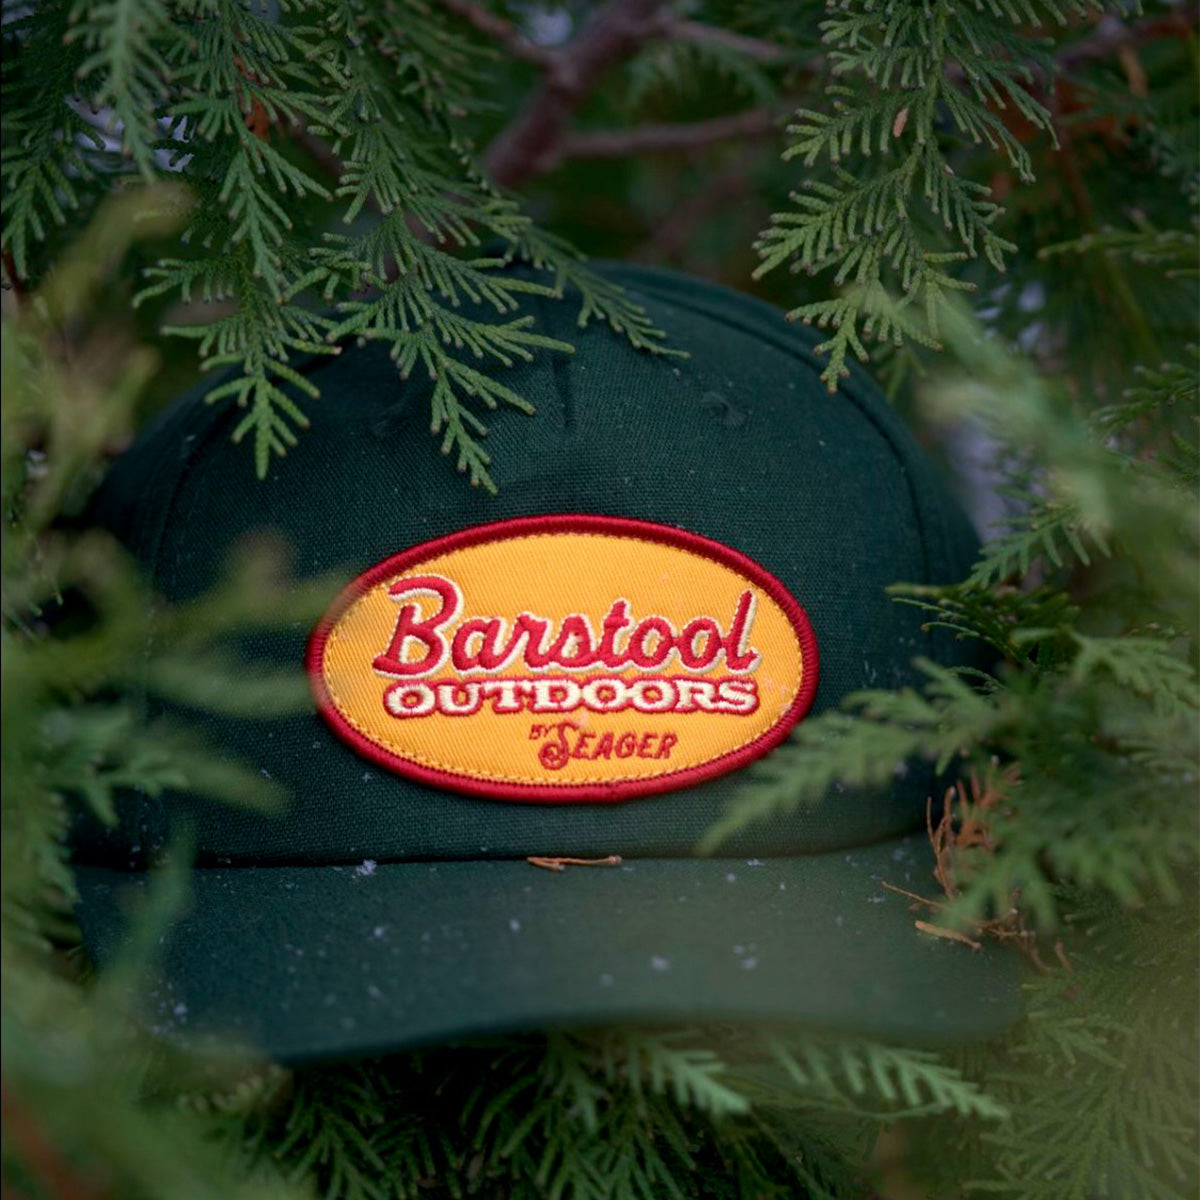 Seager x Barstool Outdoors Hat-Hats-Barstool Outdoors-Barstool Sports